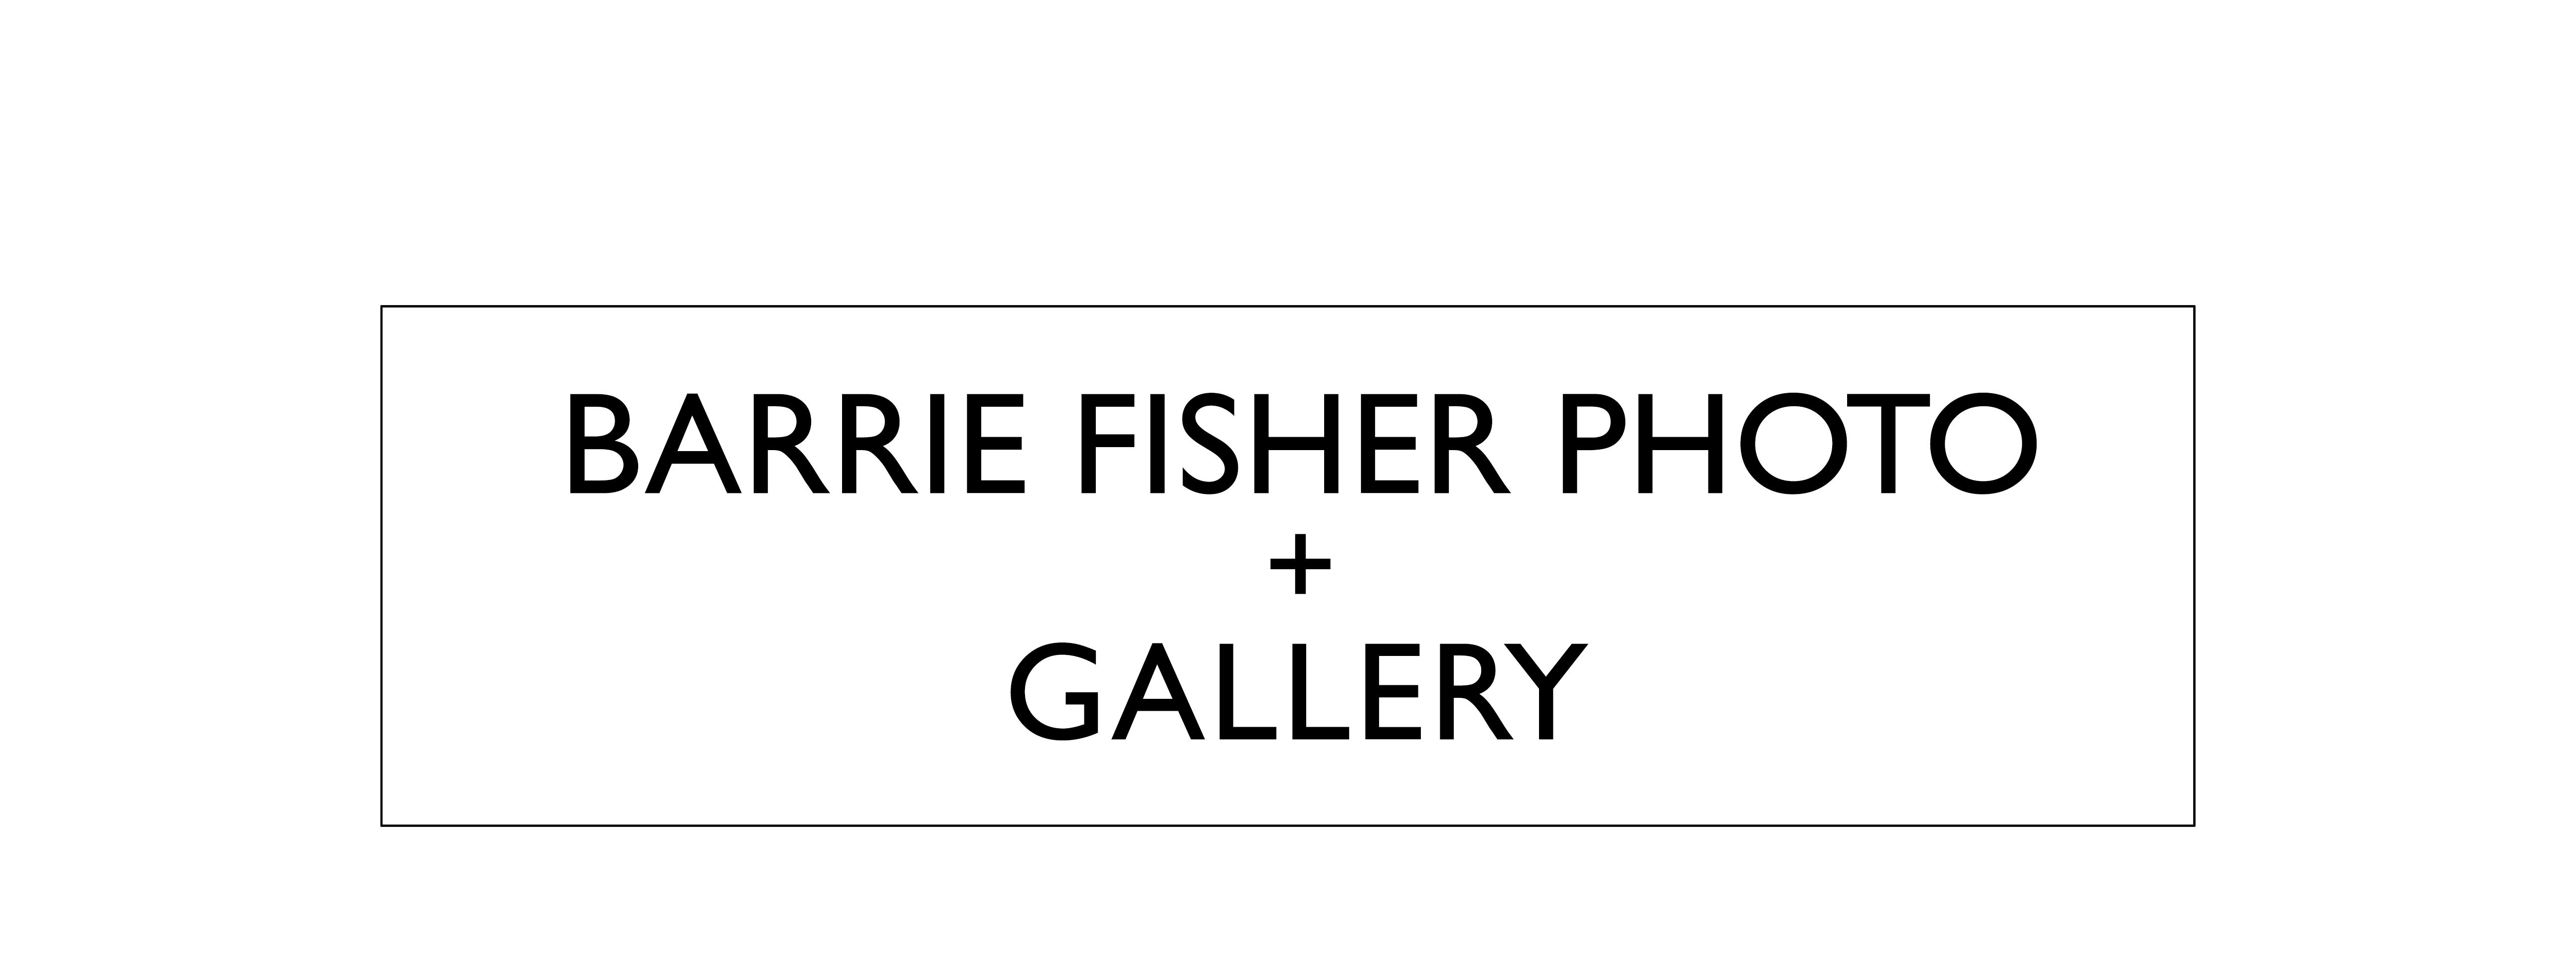 BARRIE FISHER PHOTO + GALLERY